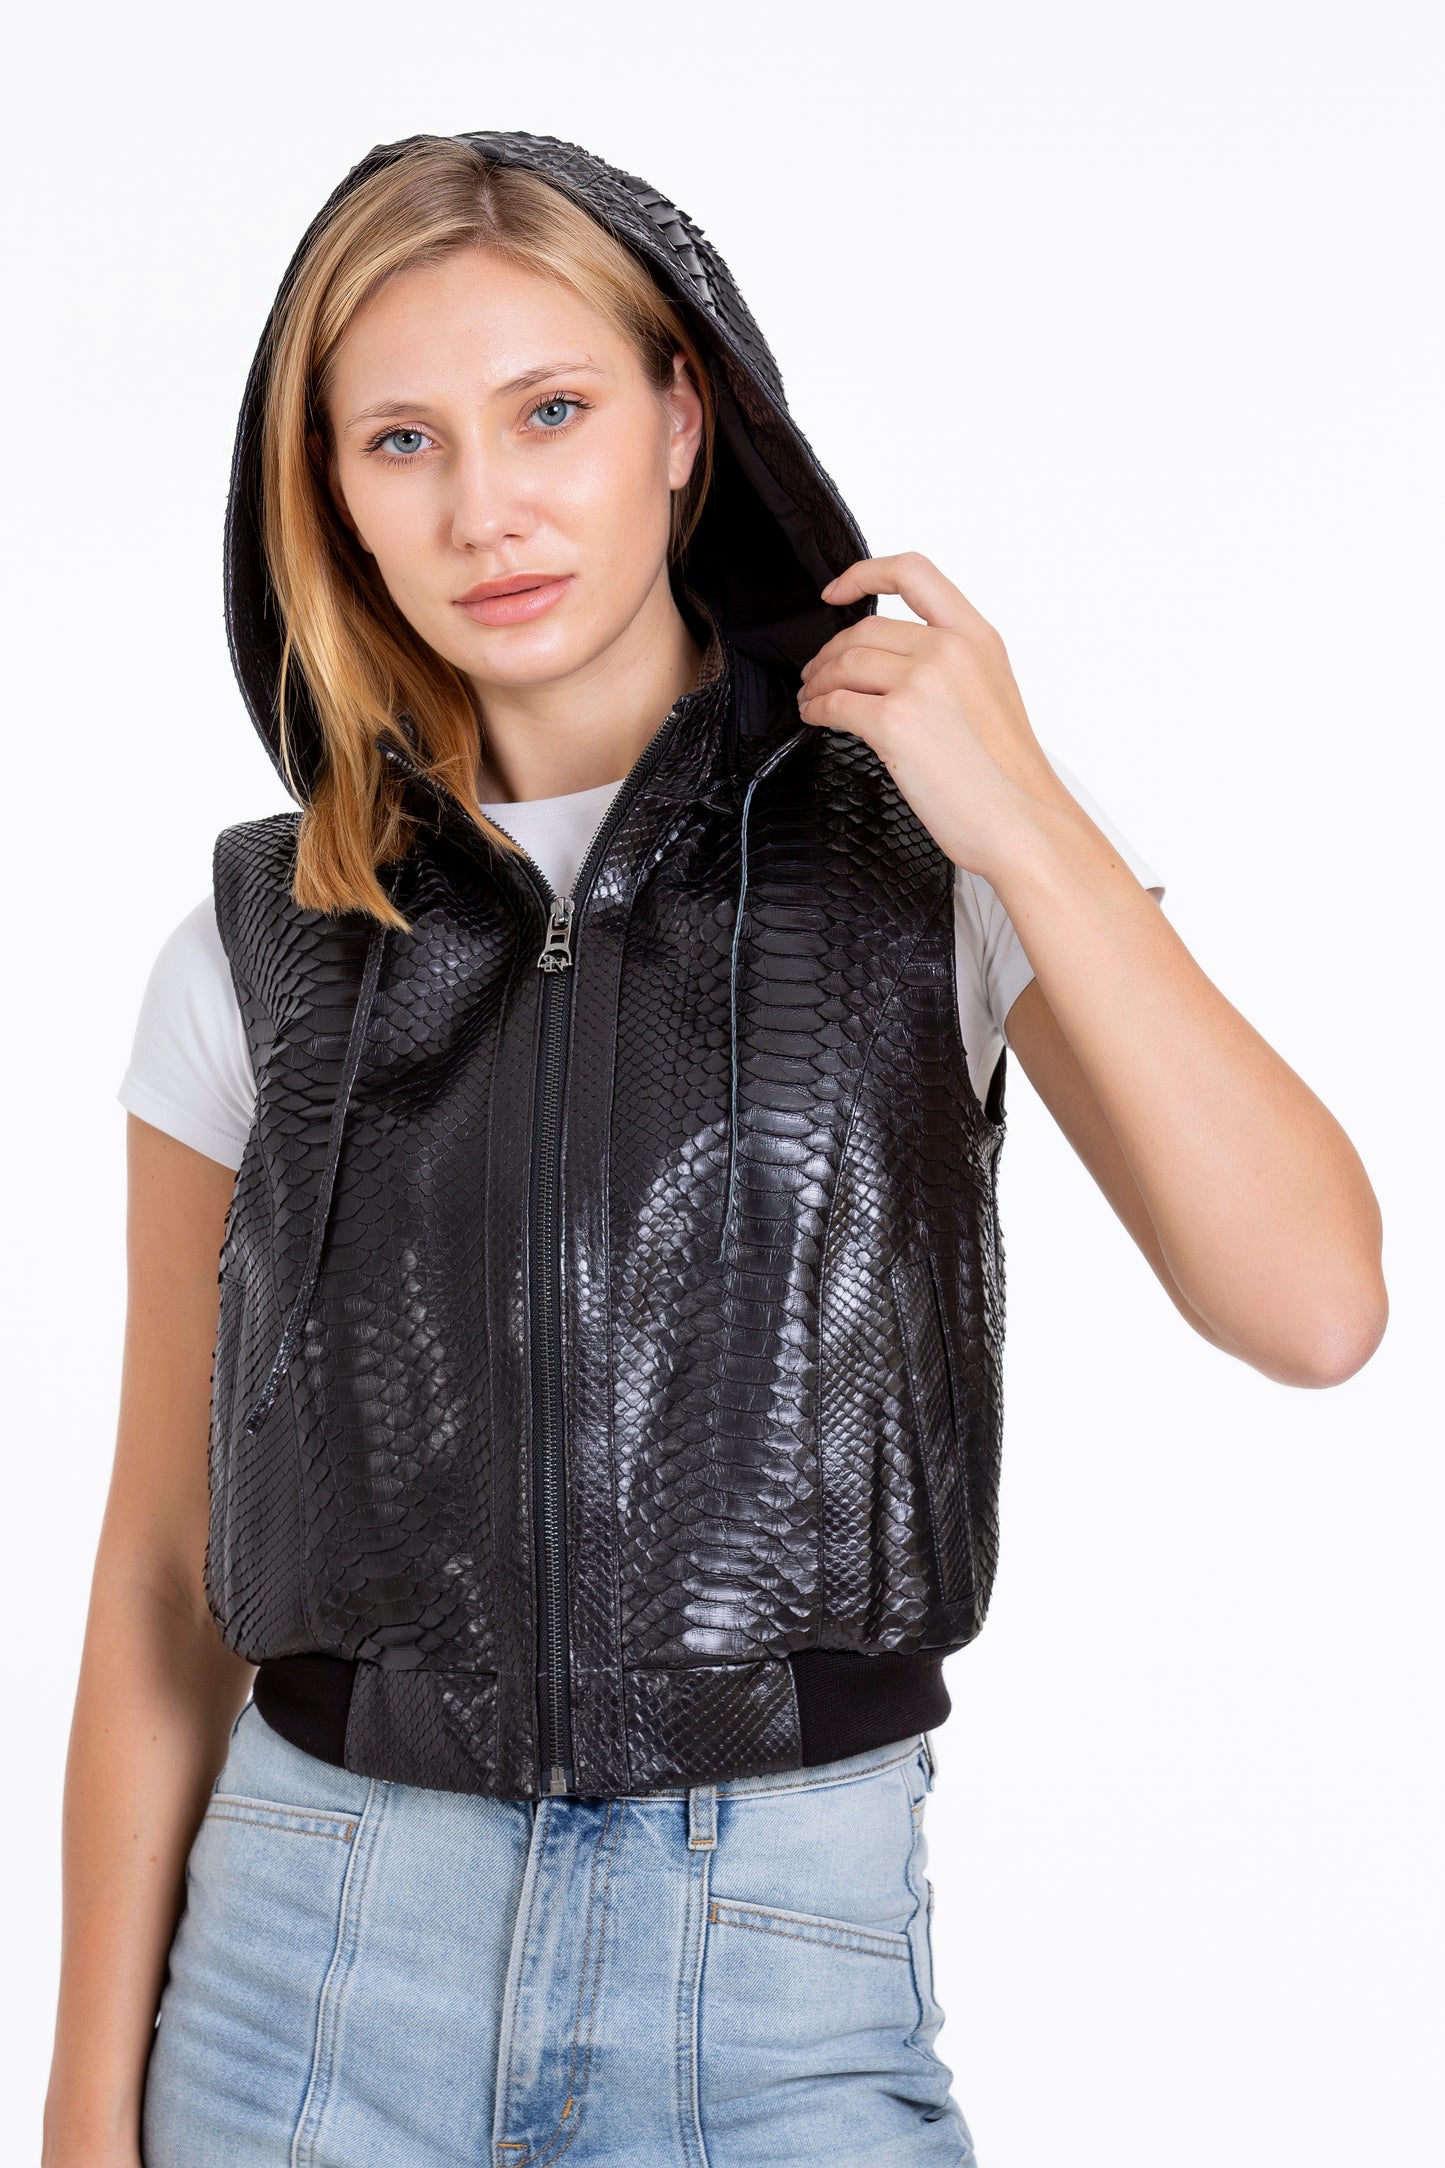 The Yanaka Pythn Skin Leather Black Zip-Up Vest with a Hood